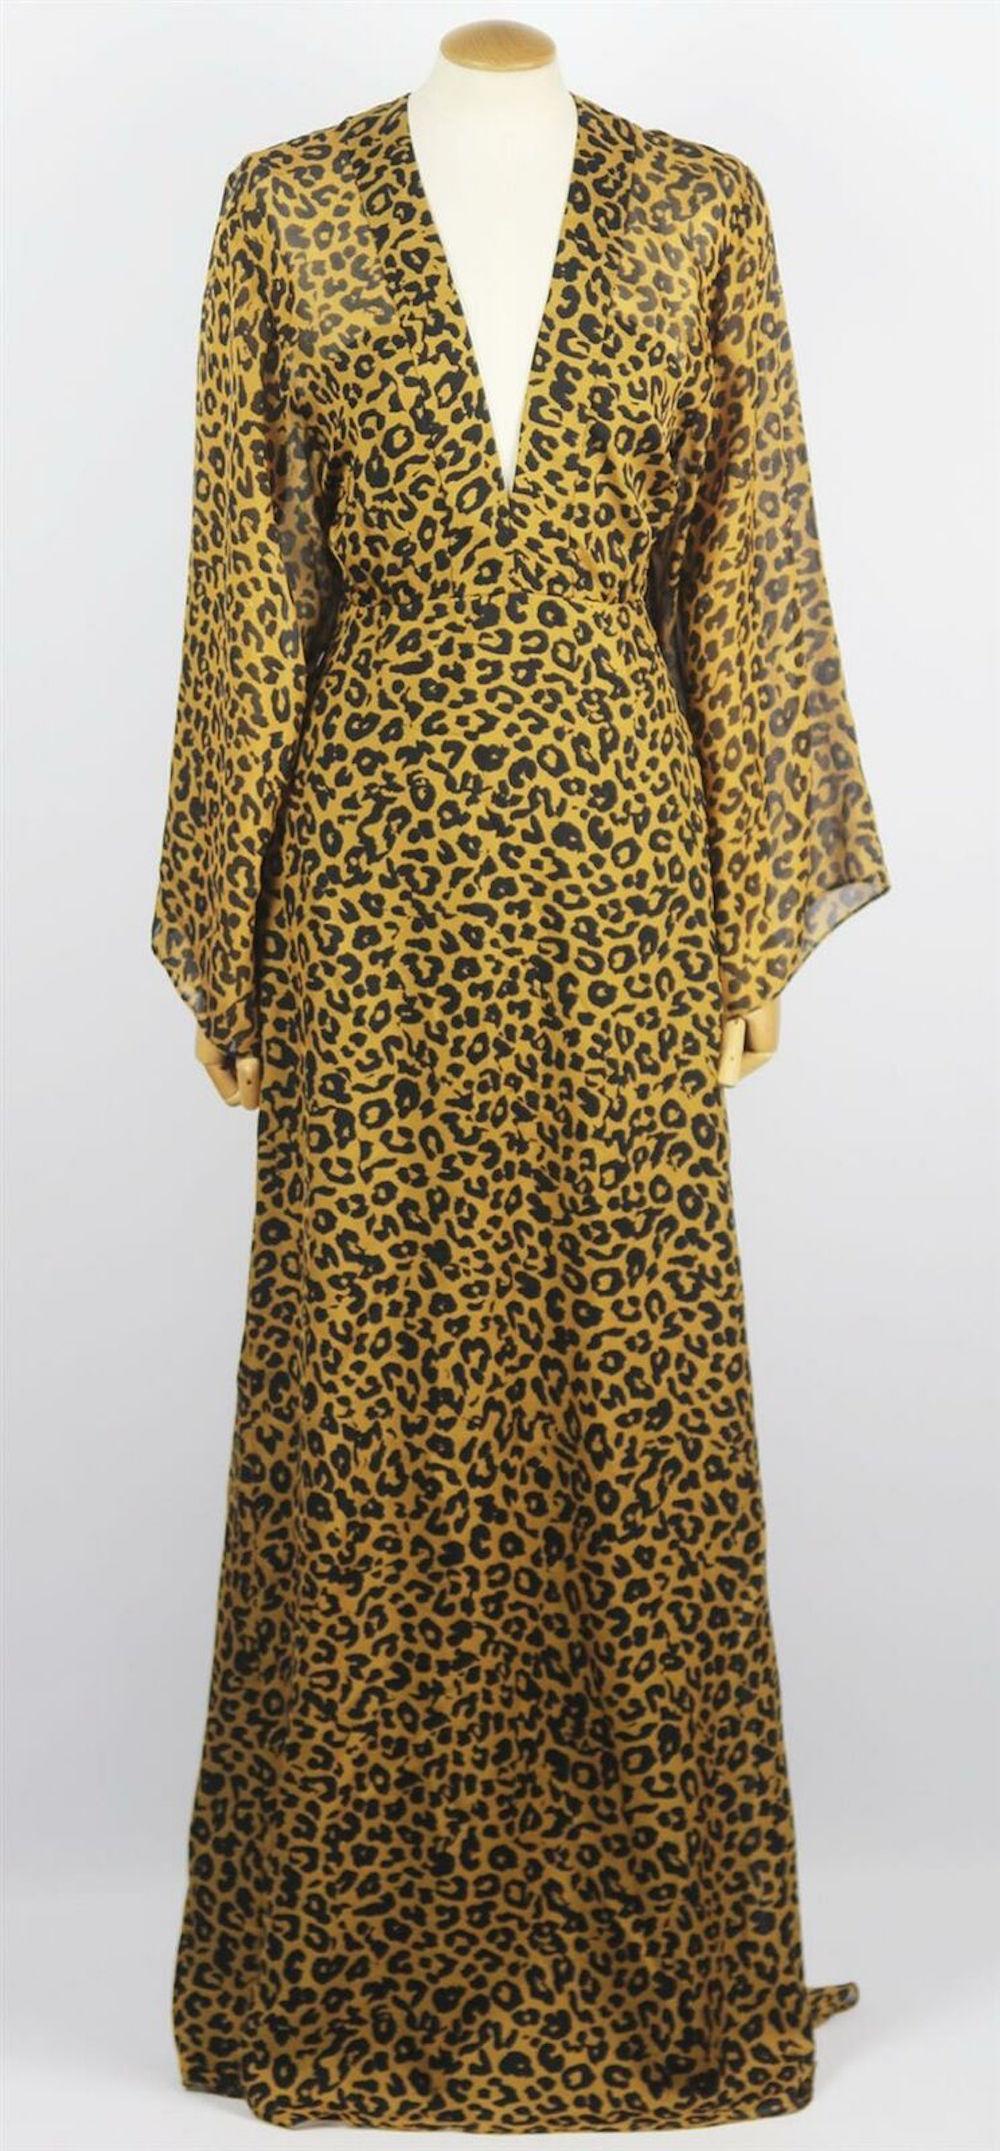 This dress has been made from lightweight silk-chiffon, Michelle Mason's dress is flatteringly cut with a wrap-effect and plunging neckline that drapes into a long silhouette.
Leopard-print silk-chiffon.
Concealed hook and zip fastening at